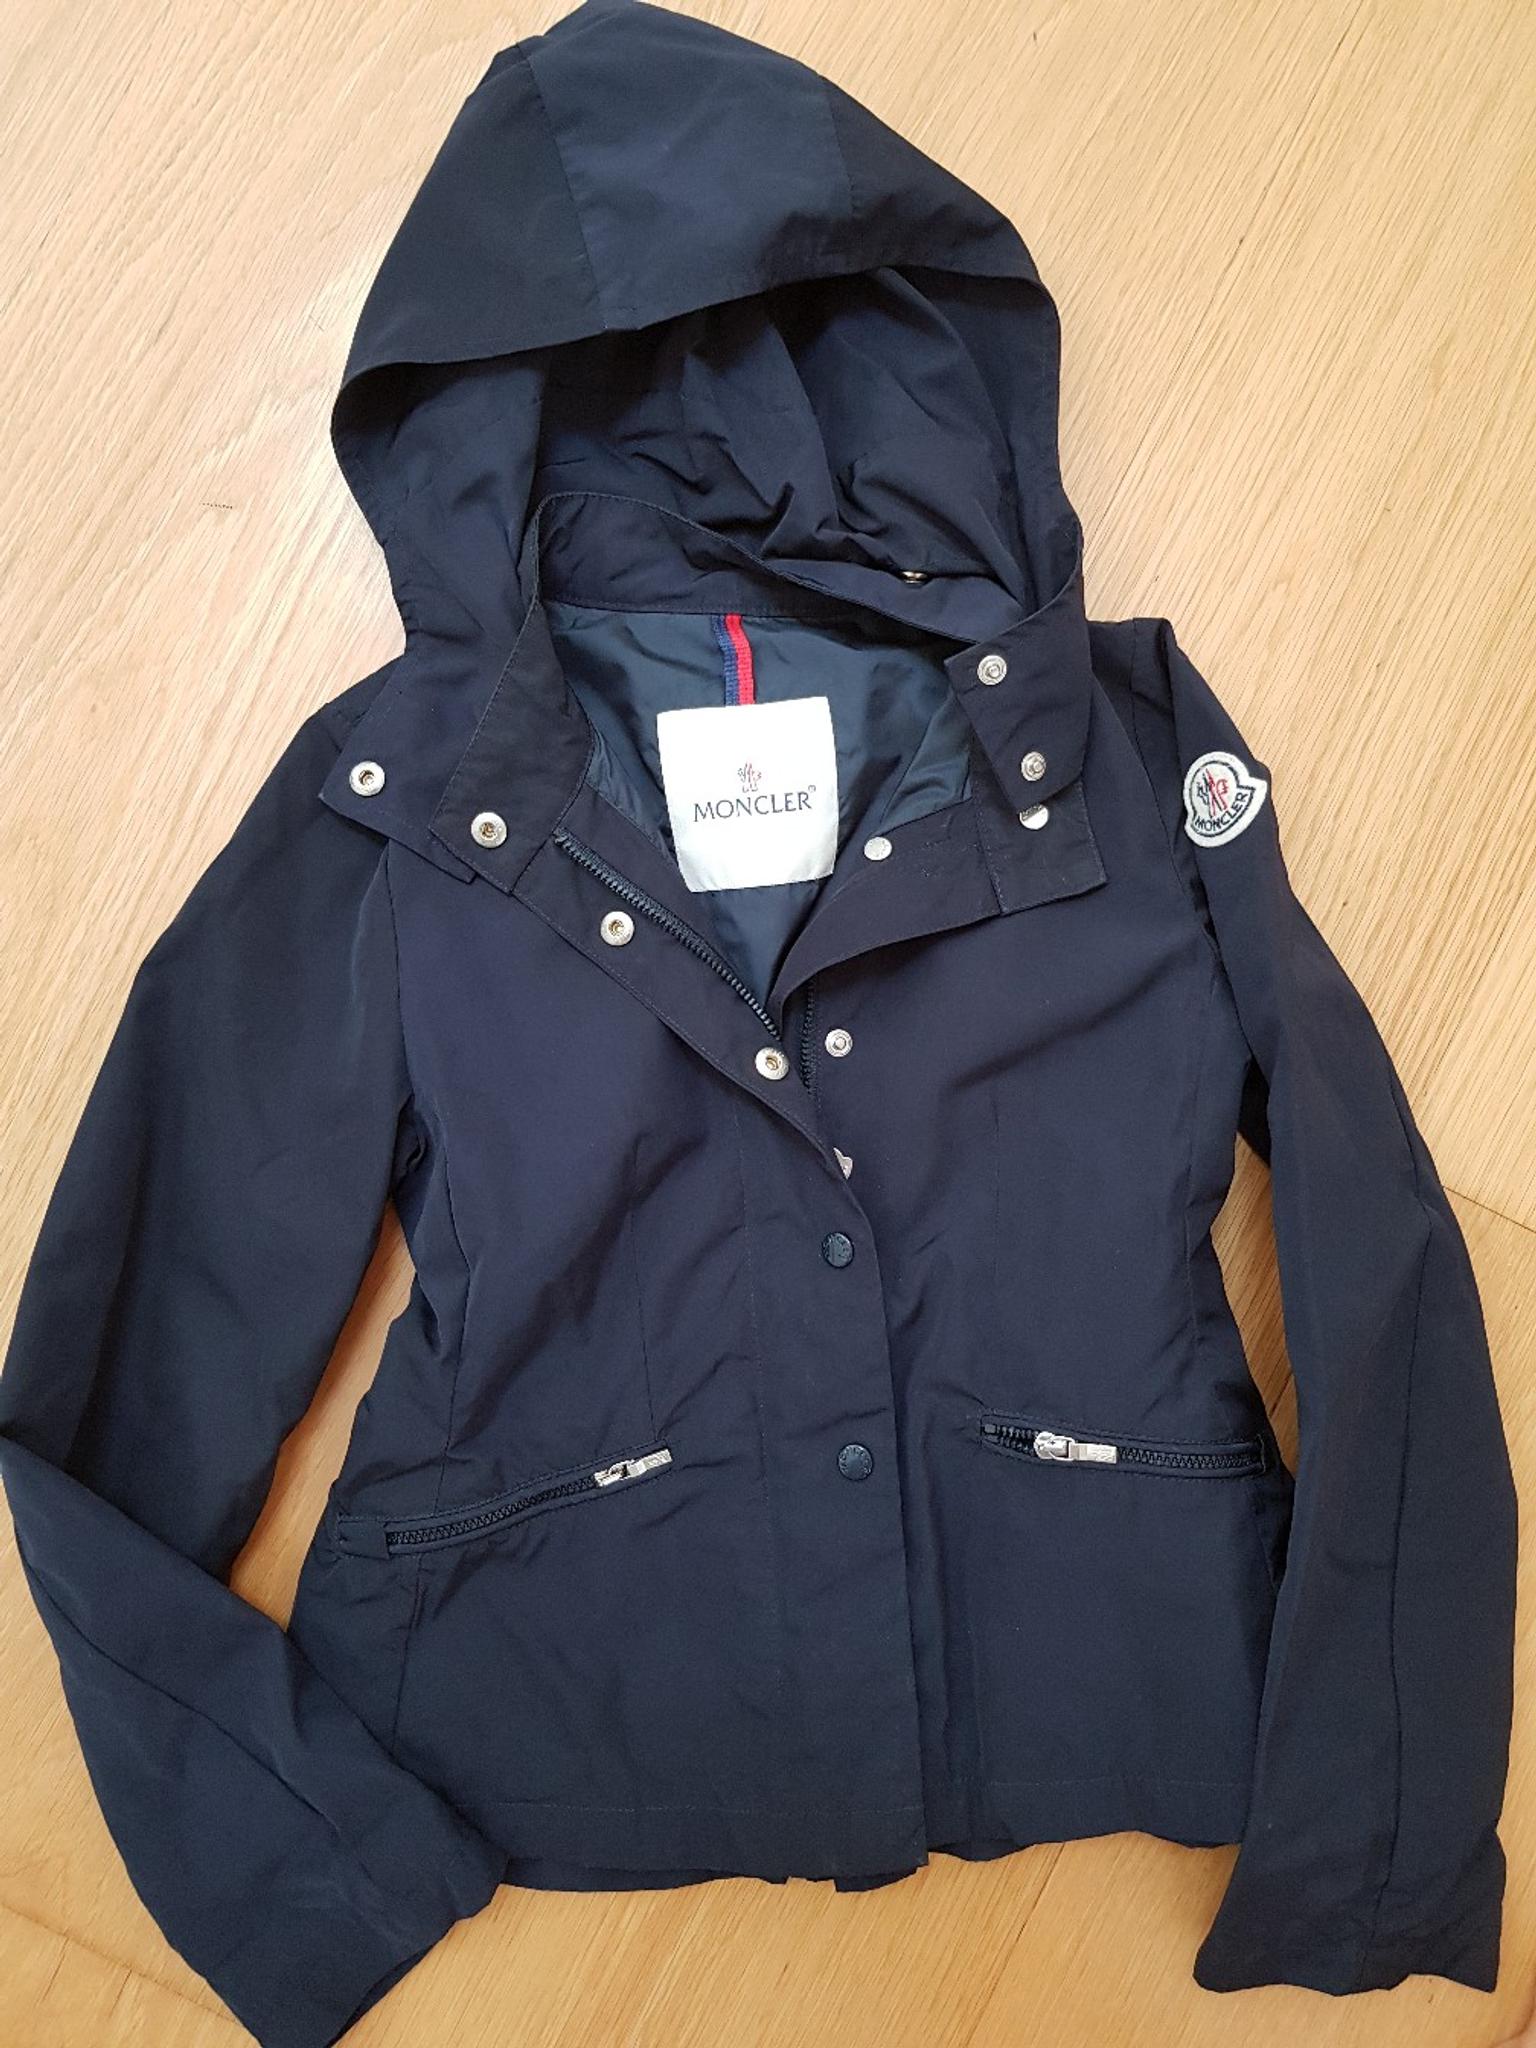 Moncler - Giacchina bimba 8 anni in 22024 Bollate for €50.00 for sale |  Shpock